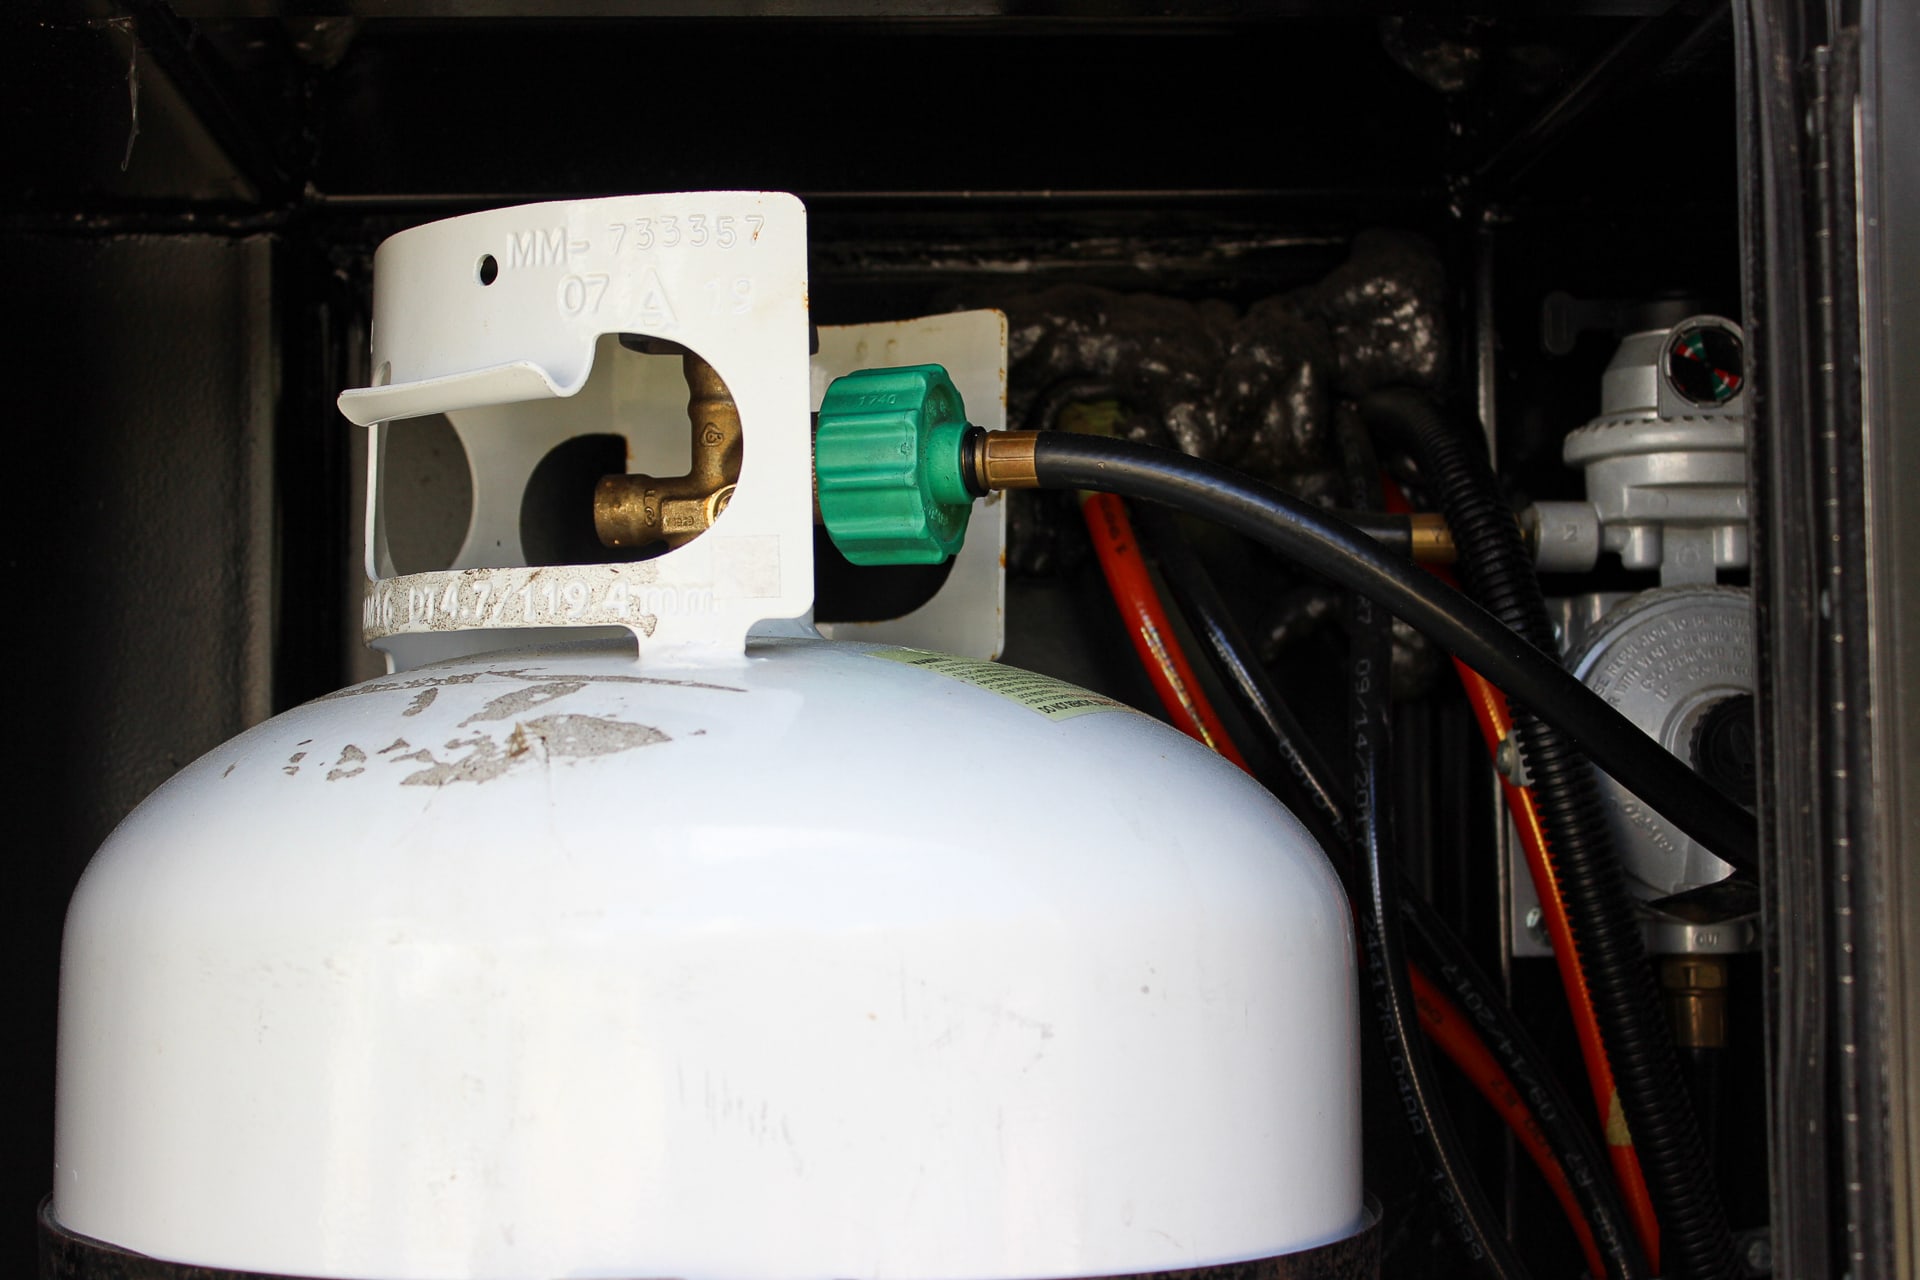 How to Manually Light an RV Oven, Furnace, Water Heater, or Refrigerator